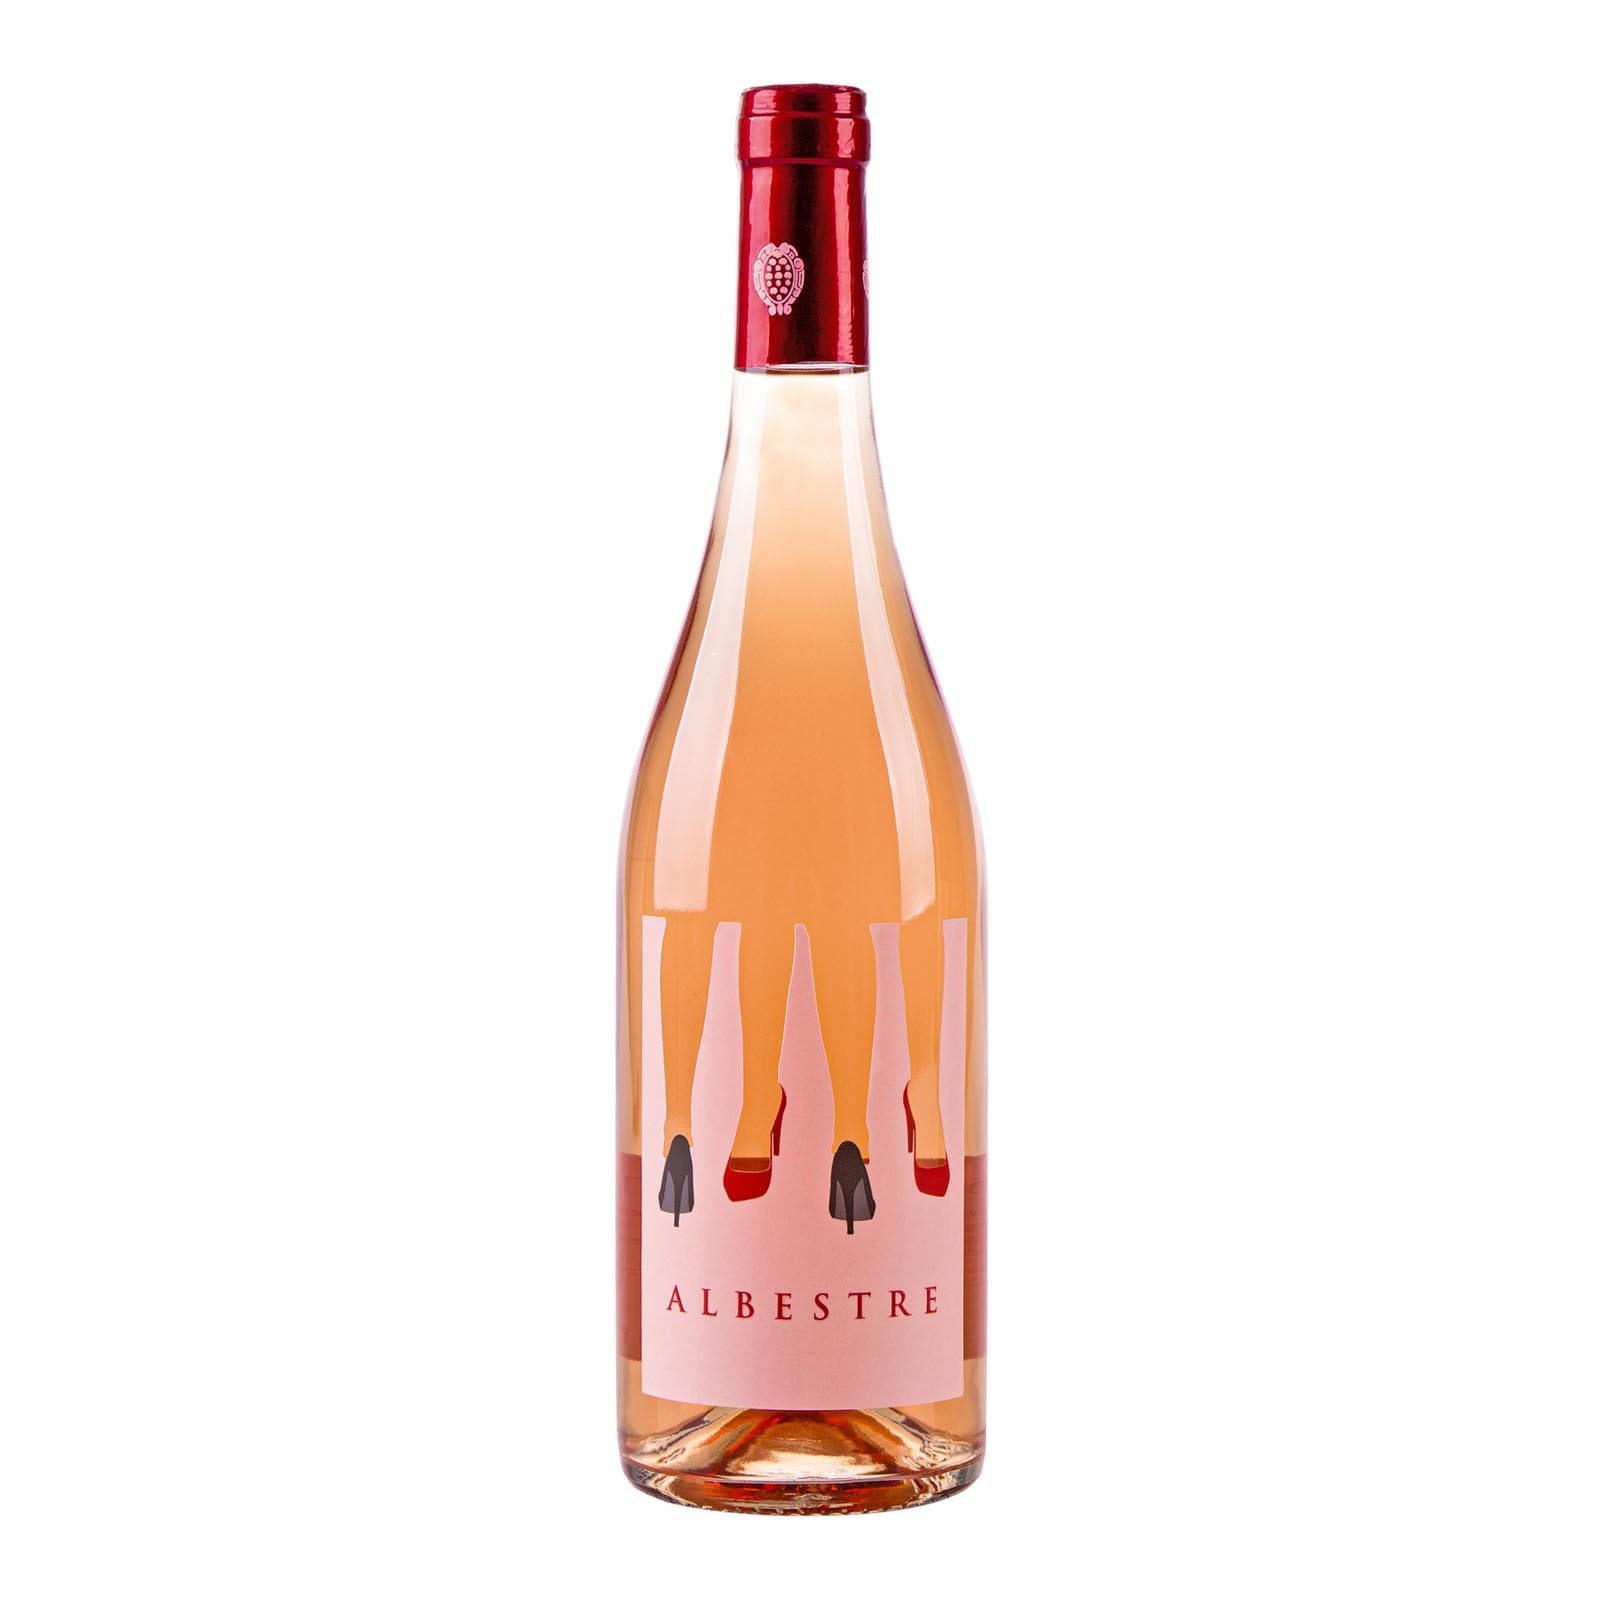 “Albestre” of Buccelletti is a delicate rosé wine with a gentle aroma of fresh cherry, obtained through a bloodletting blend of Sangiovese and Syrah grapes from the first pressing.